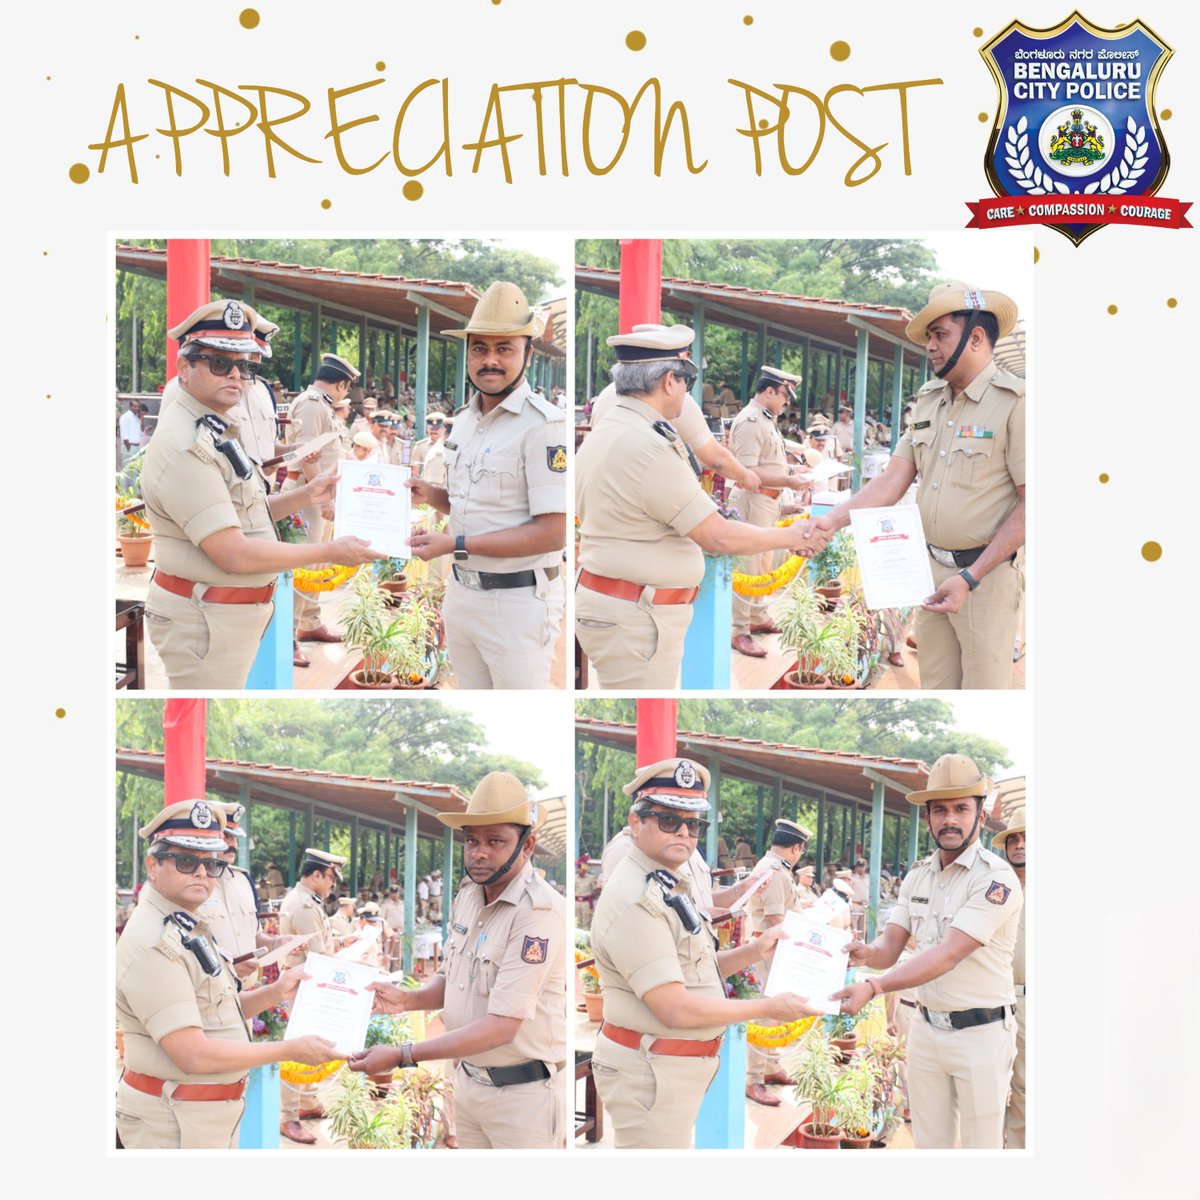 Our staff Sri.Tippeswamy,Sri Sadashiv & Sri Kumar of @pulikeshinagrps received Appreciation letter from @CPBlr for detecting an LPR Case & Sri Yallappa who successfully traced more than 90 lost phones through CEIR portal also received the same. @BlrCityPolice #weserveweprotect